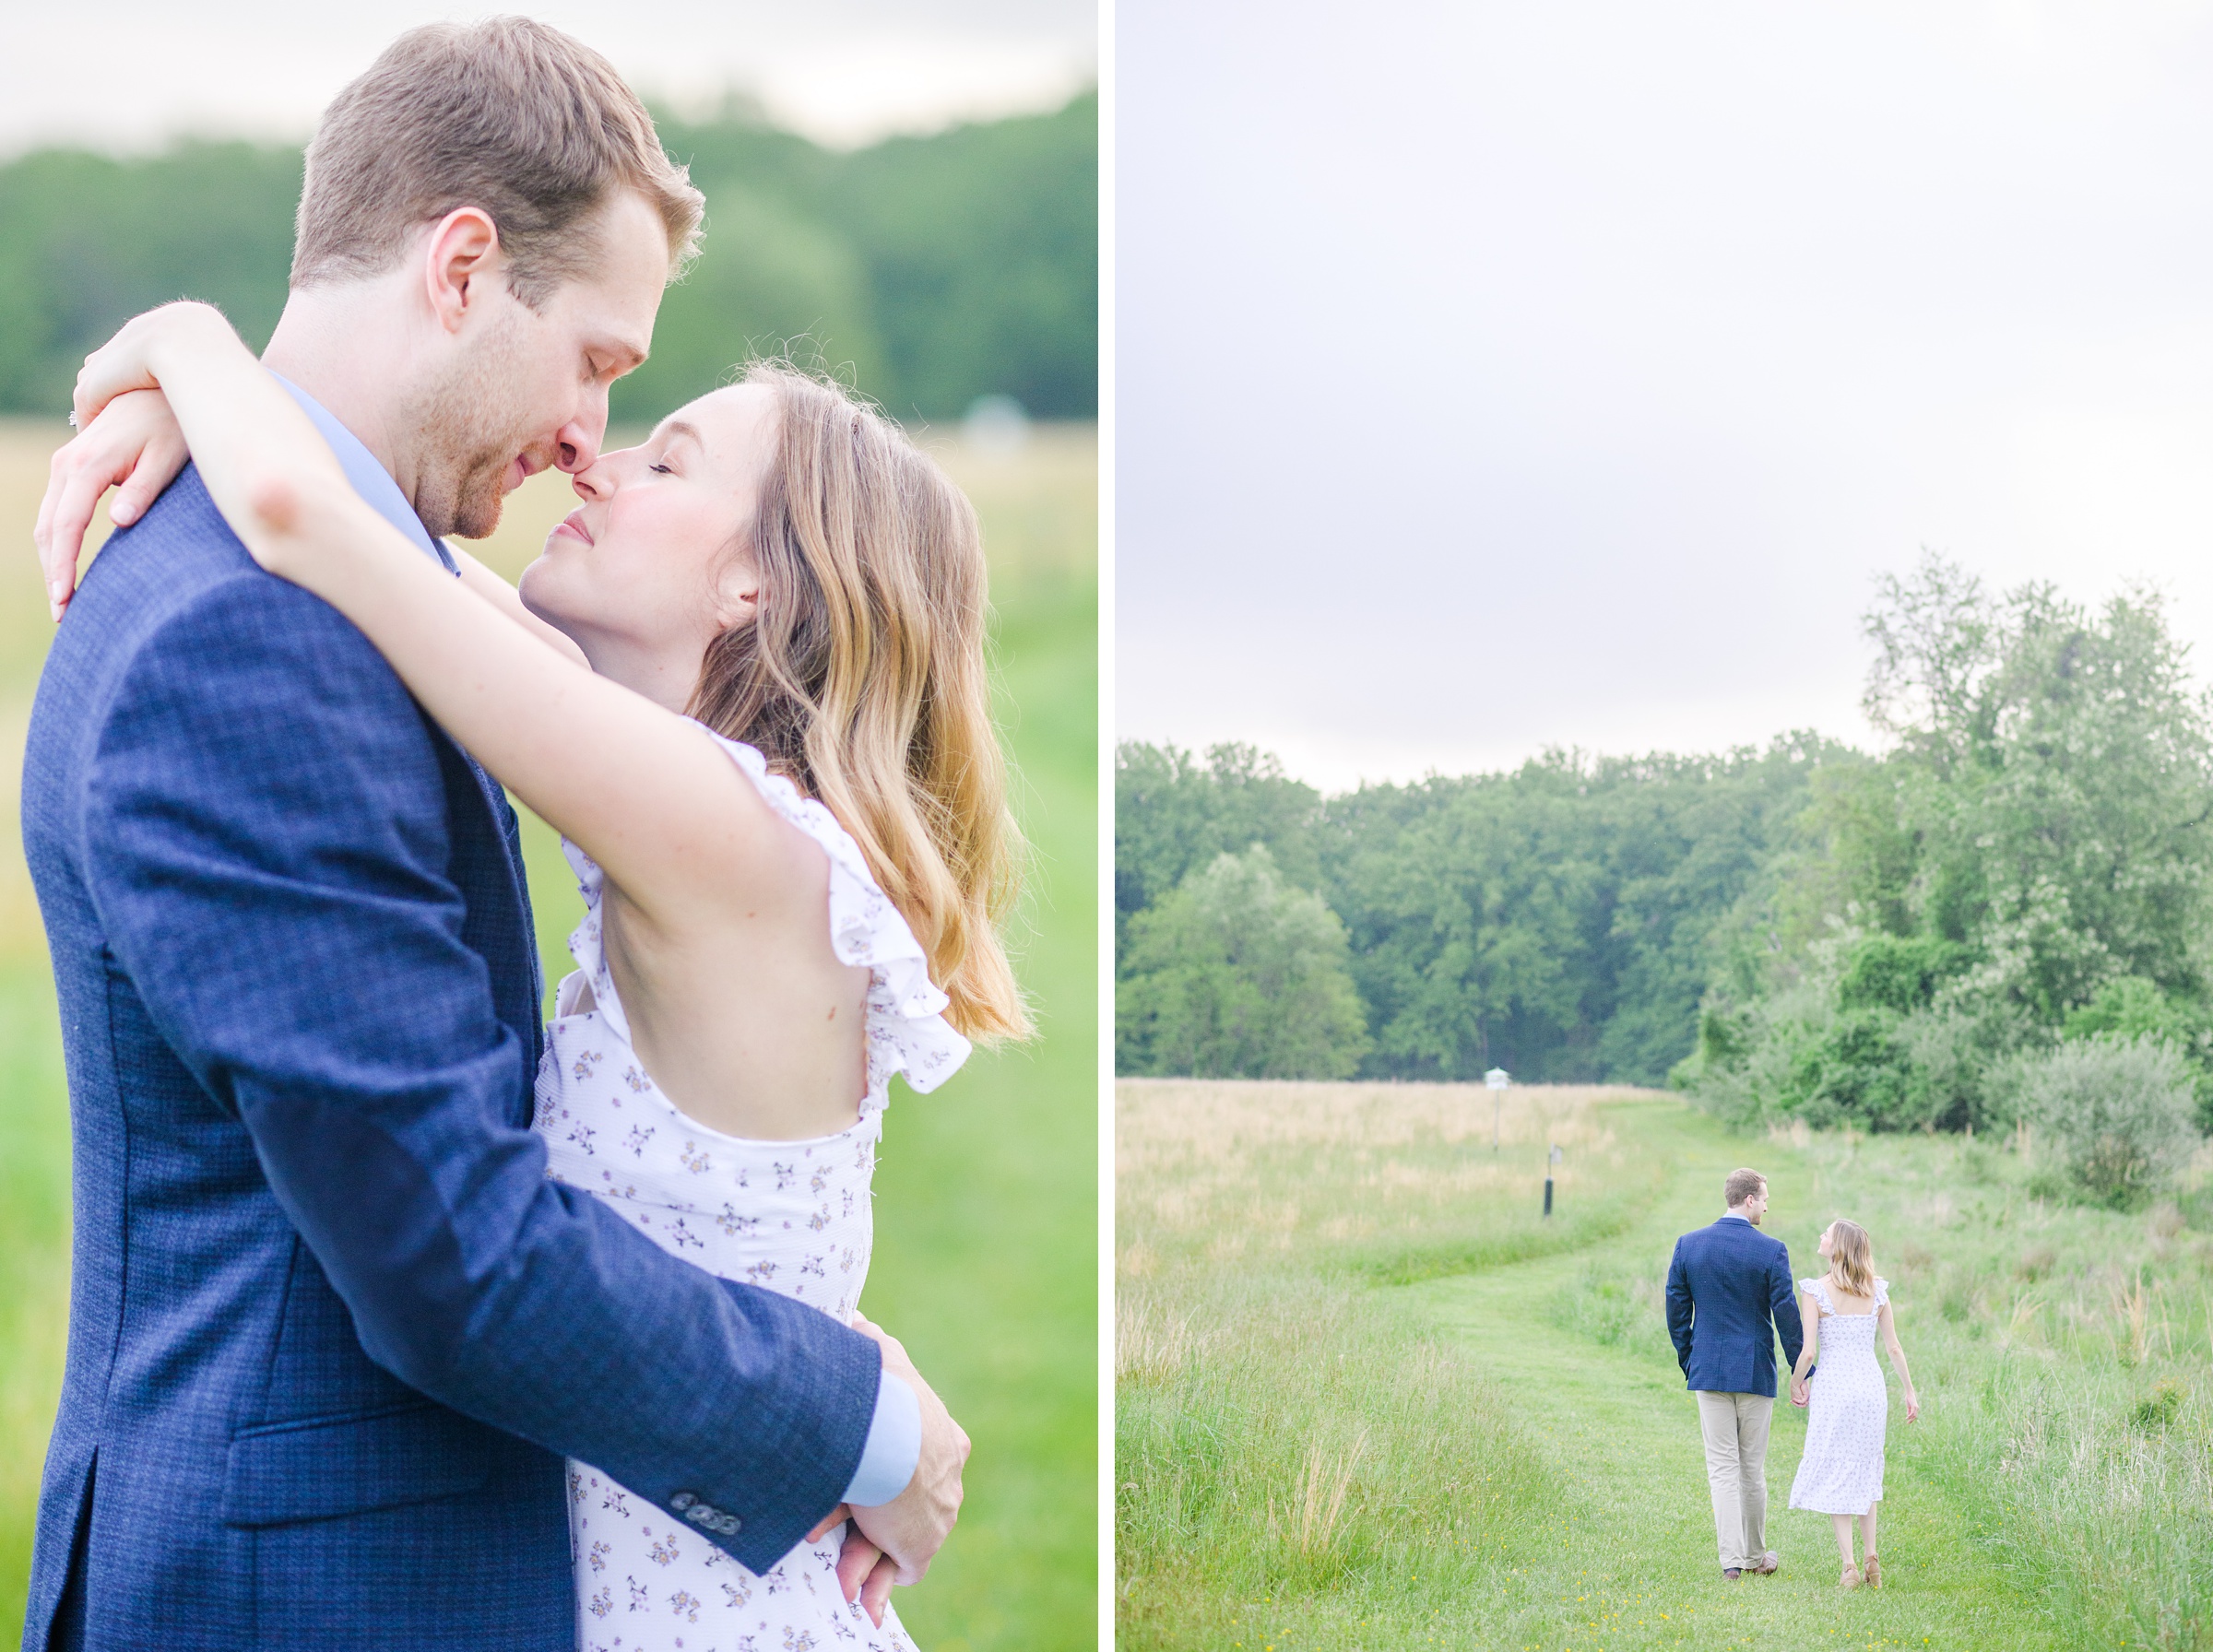 Engaged Couple poses in the fields near Belmont Manor during a rainy sunset engagement photographed by Baltimore Wedding Photographer Cait Kramer